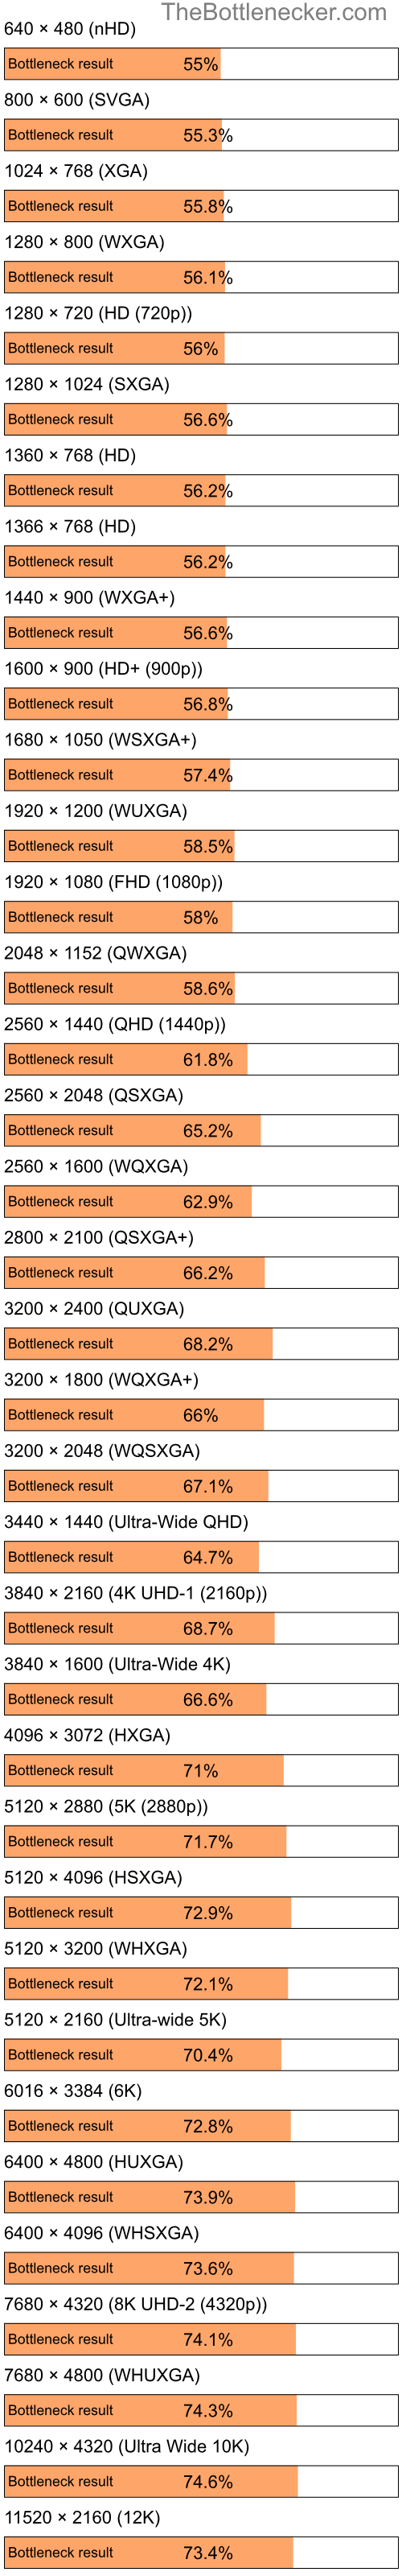 Bottleneck results by resolution for Intel Atom N270 and AMD Mobility Radeon HD 3470 in Processor Intense Tasks